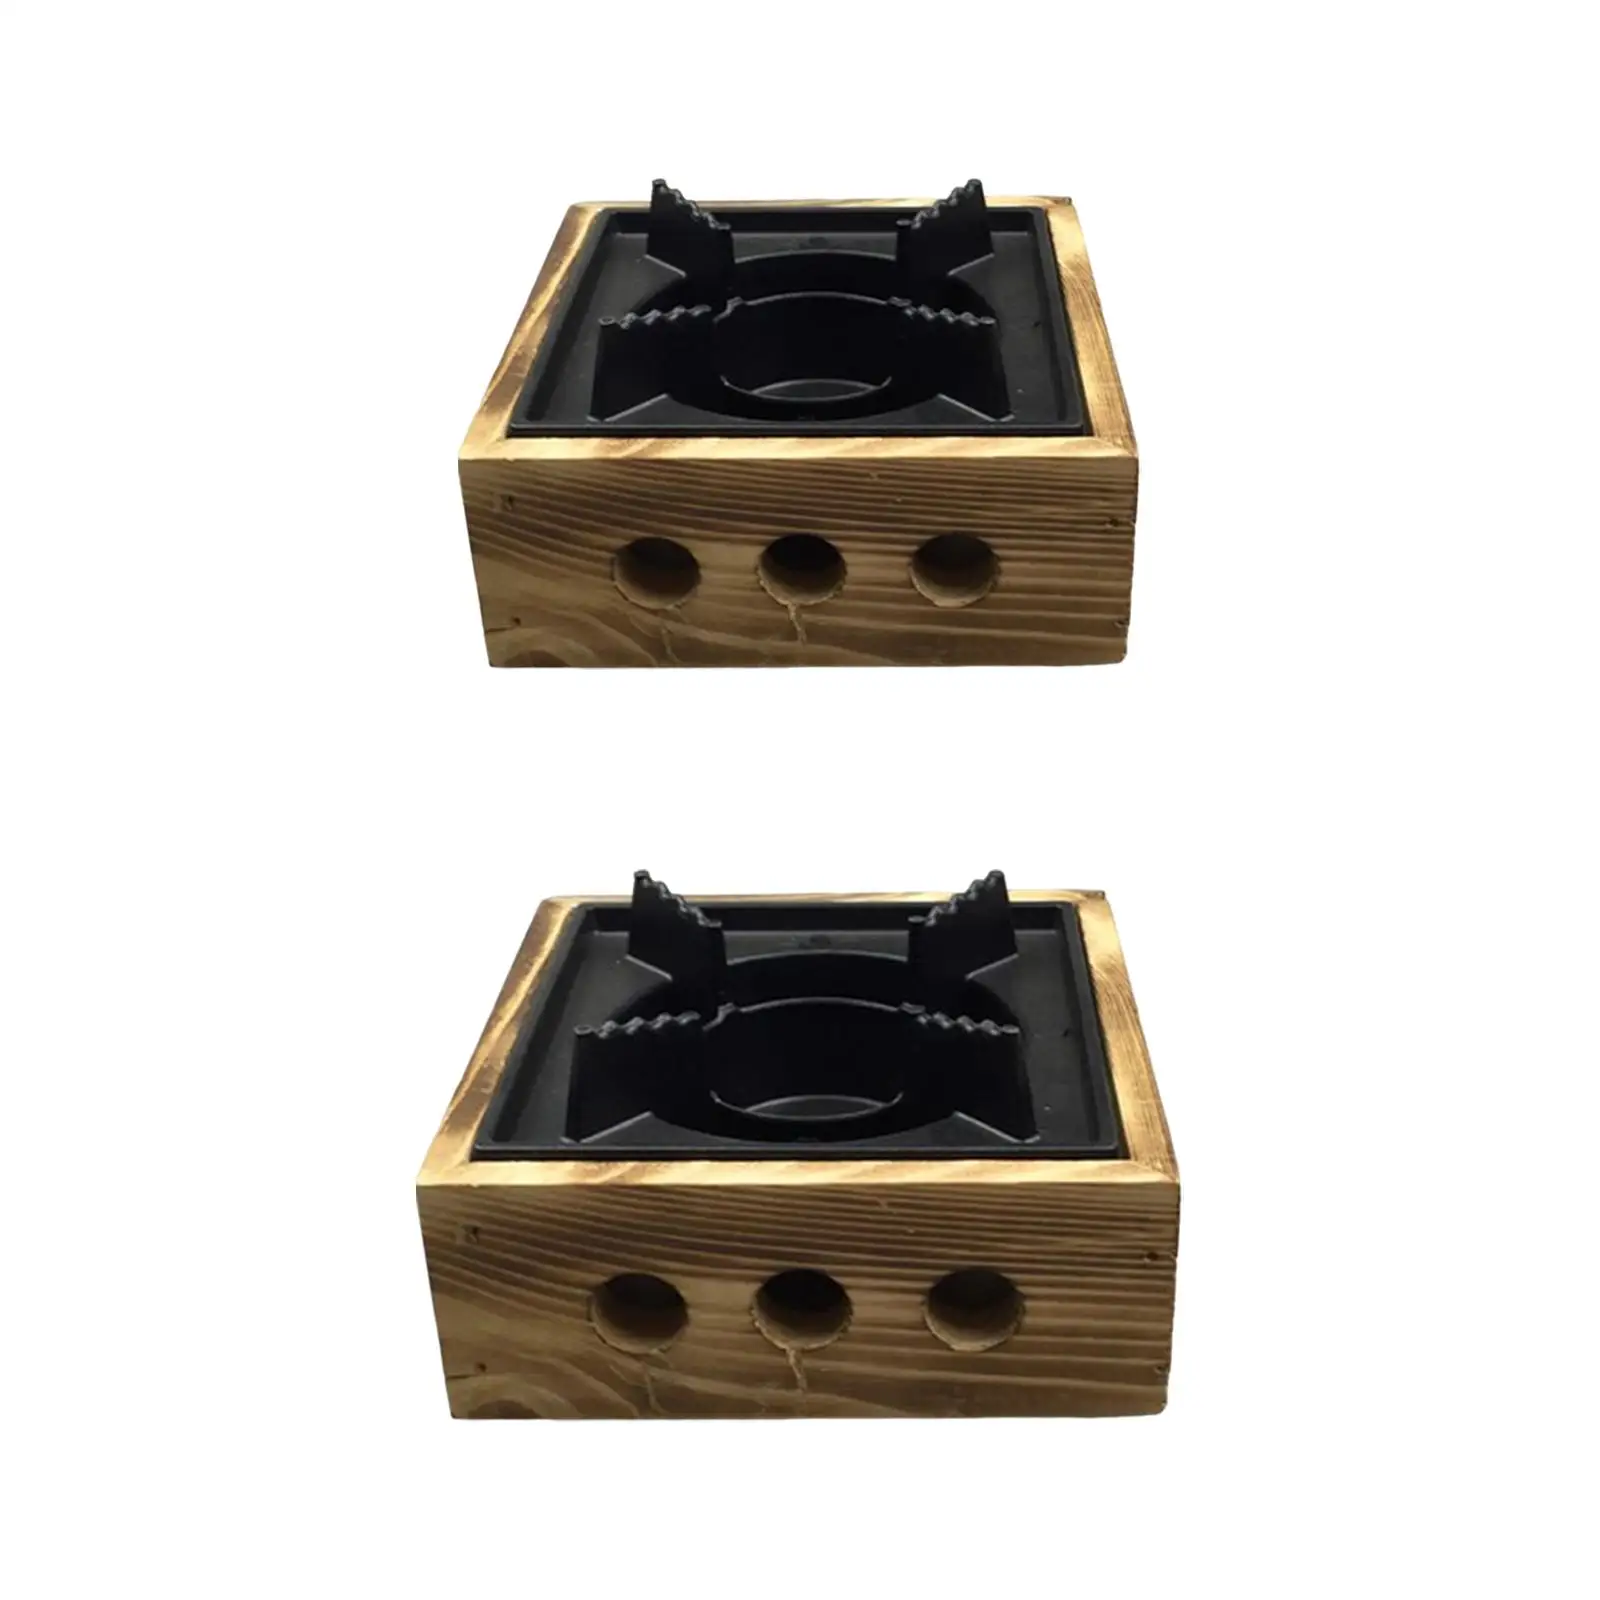 Compact Alcohol Stoves Stew Hot Pot with Wooden Base Solid Alcohol Stoves Lightweight Spirit Burner for Camping Backpacking